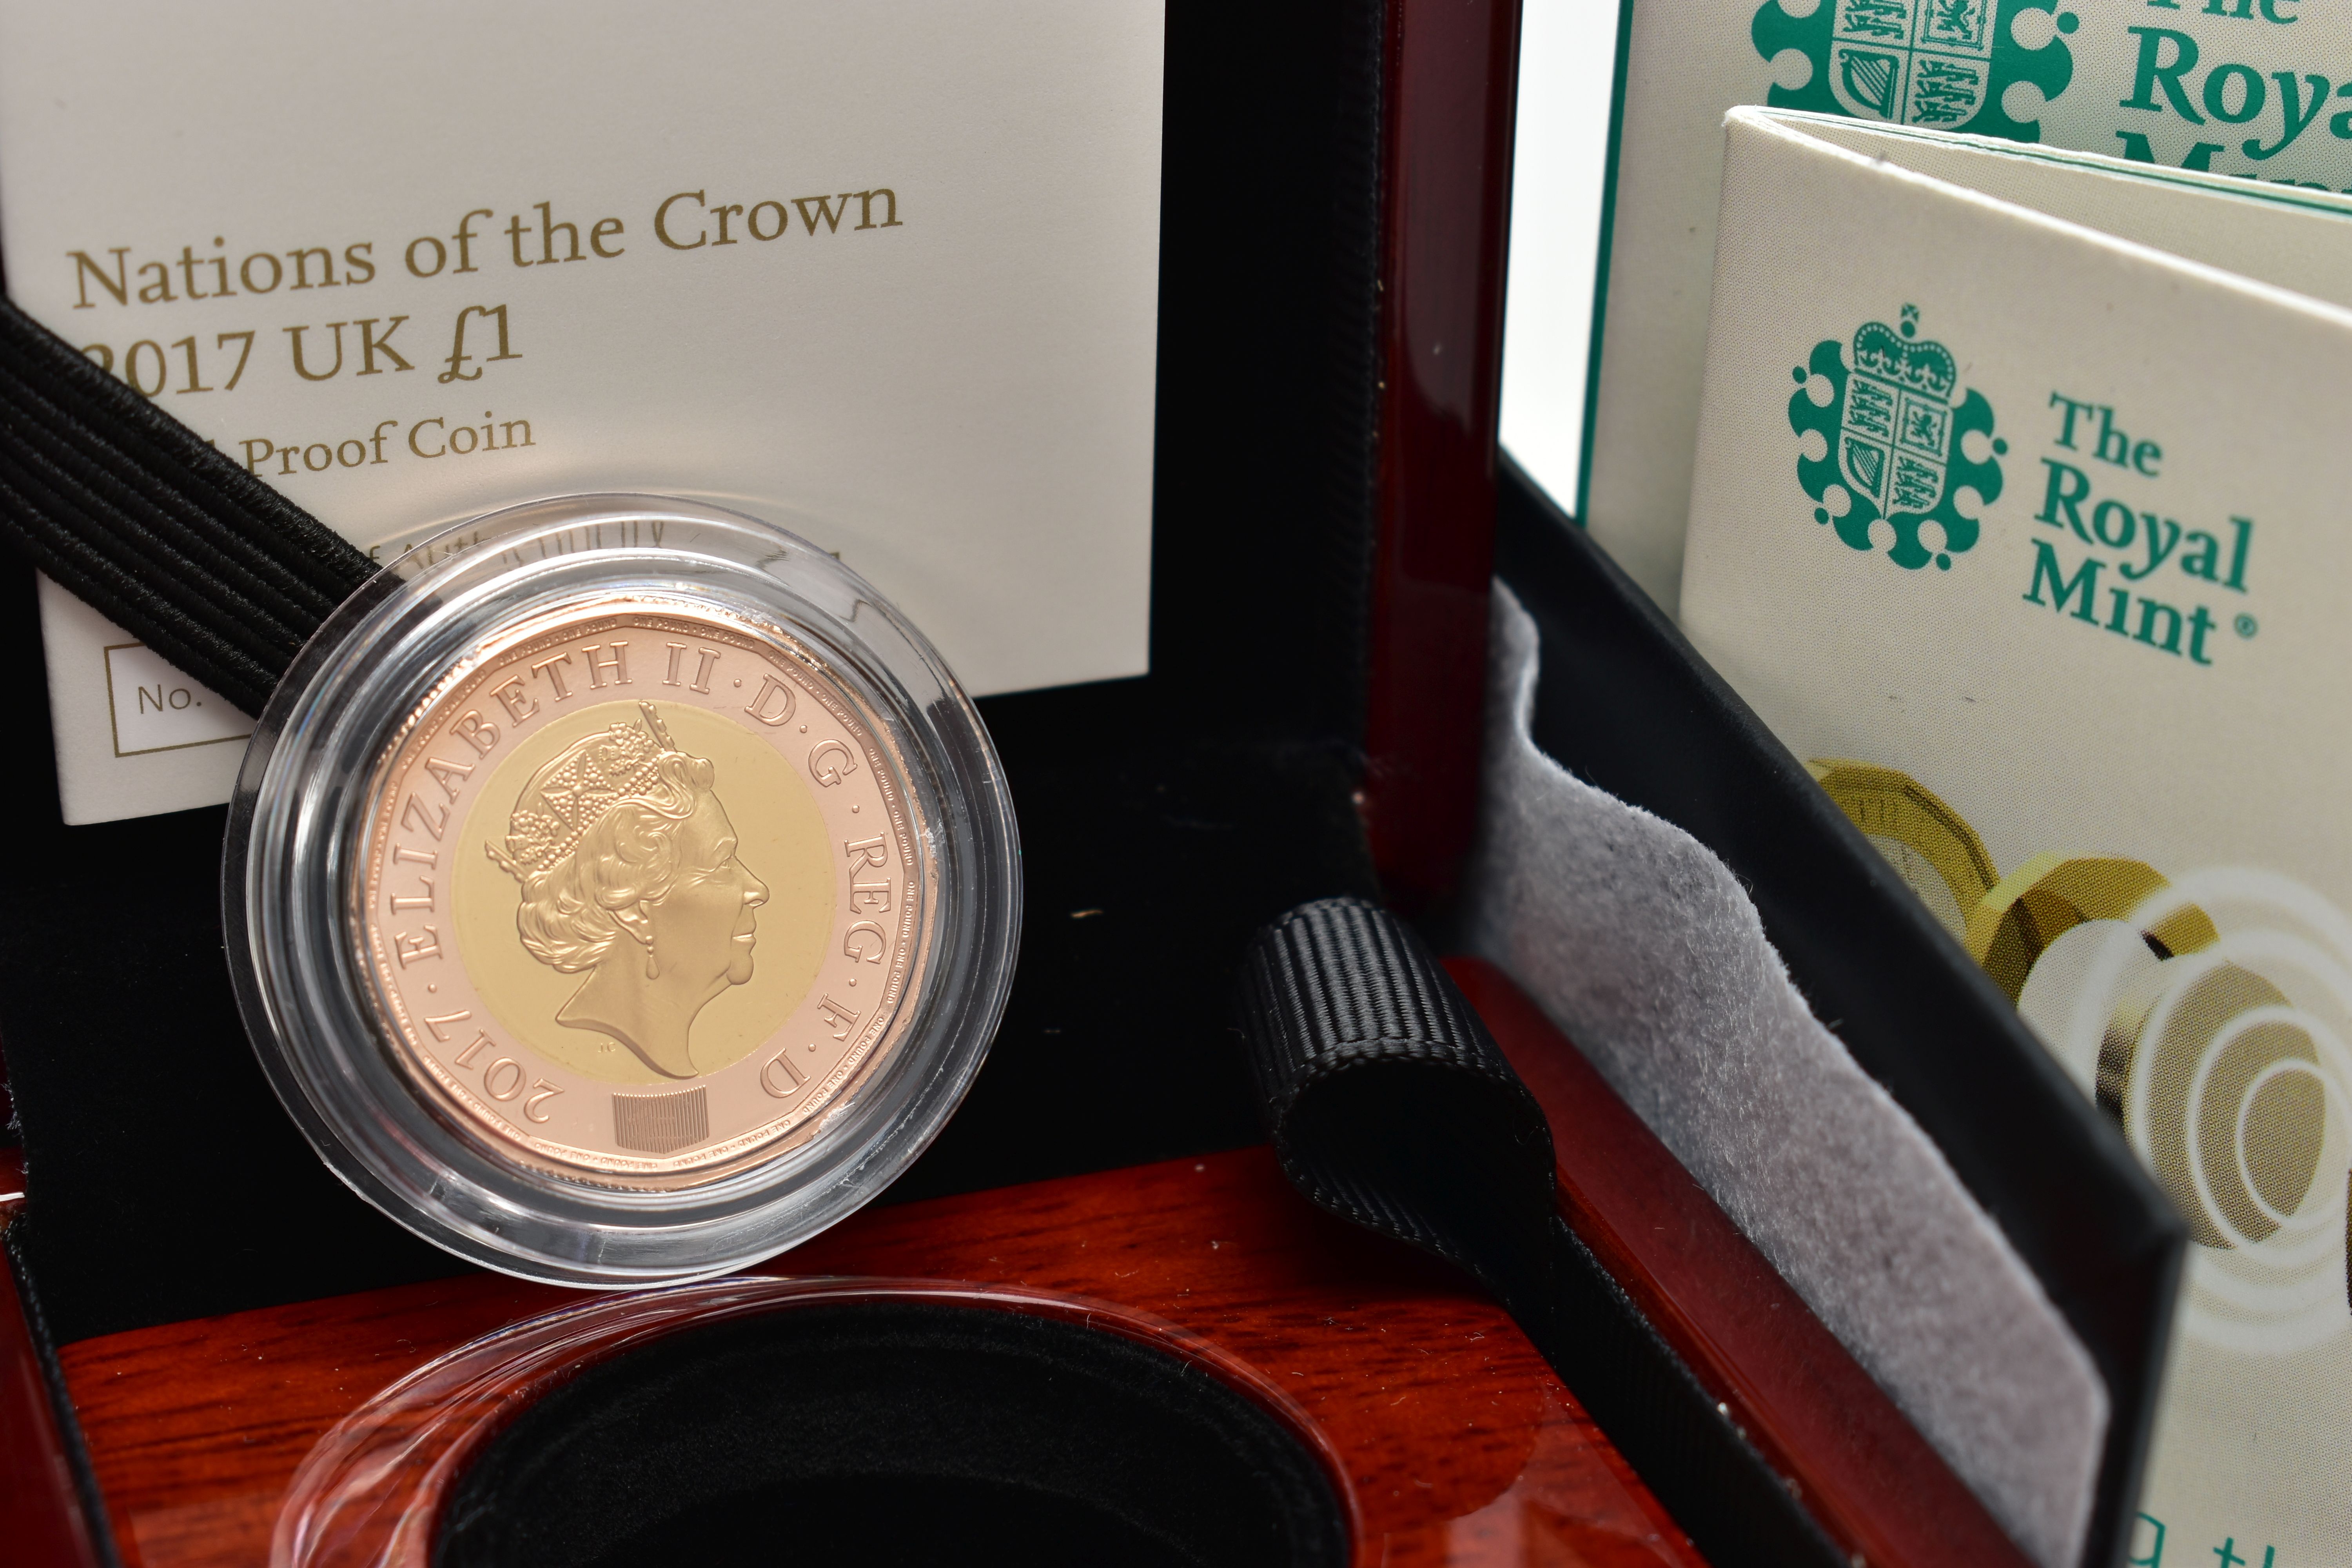 A ROYAL MINT DESIGNING THE FUTURE NATIONS OF THE CROWN GOLD PROOF ONE POUND COIN, 22ct, 0.916 fine - Image 2 of 2